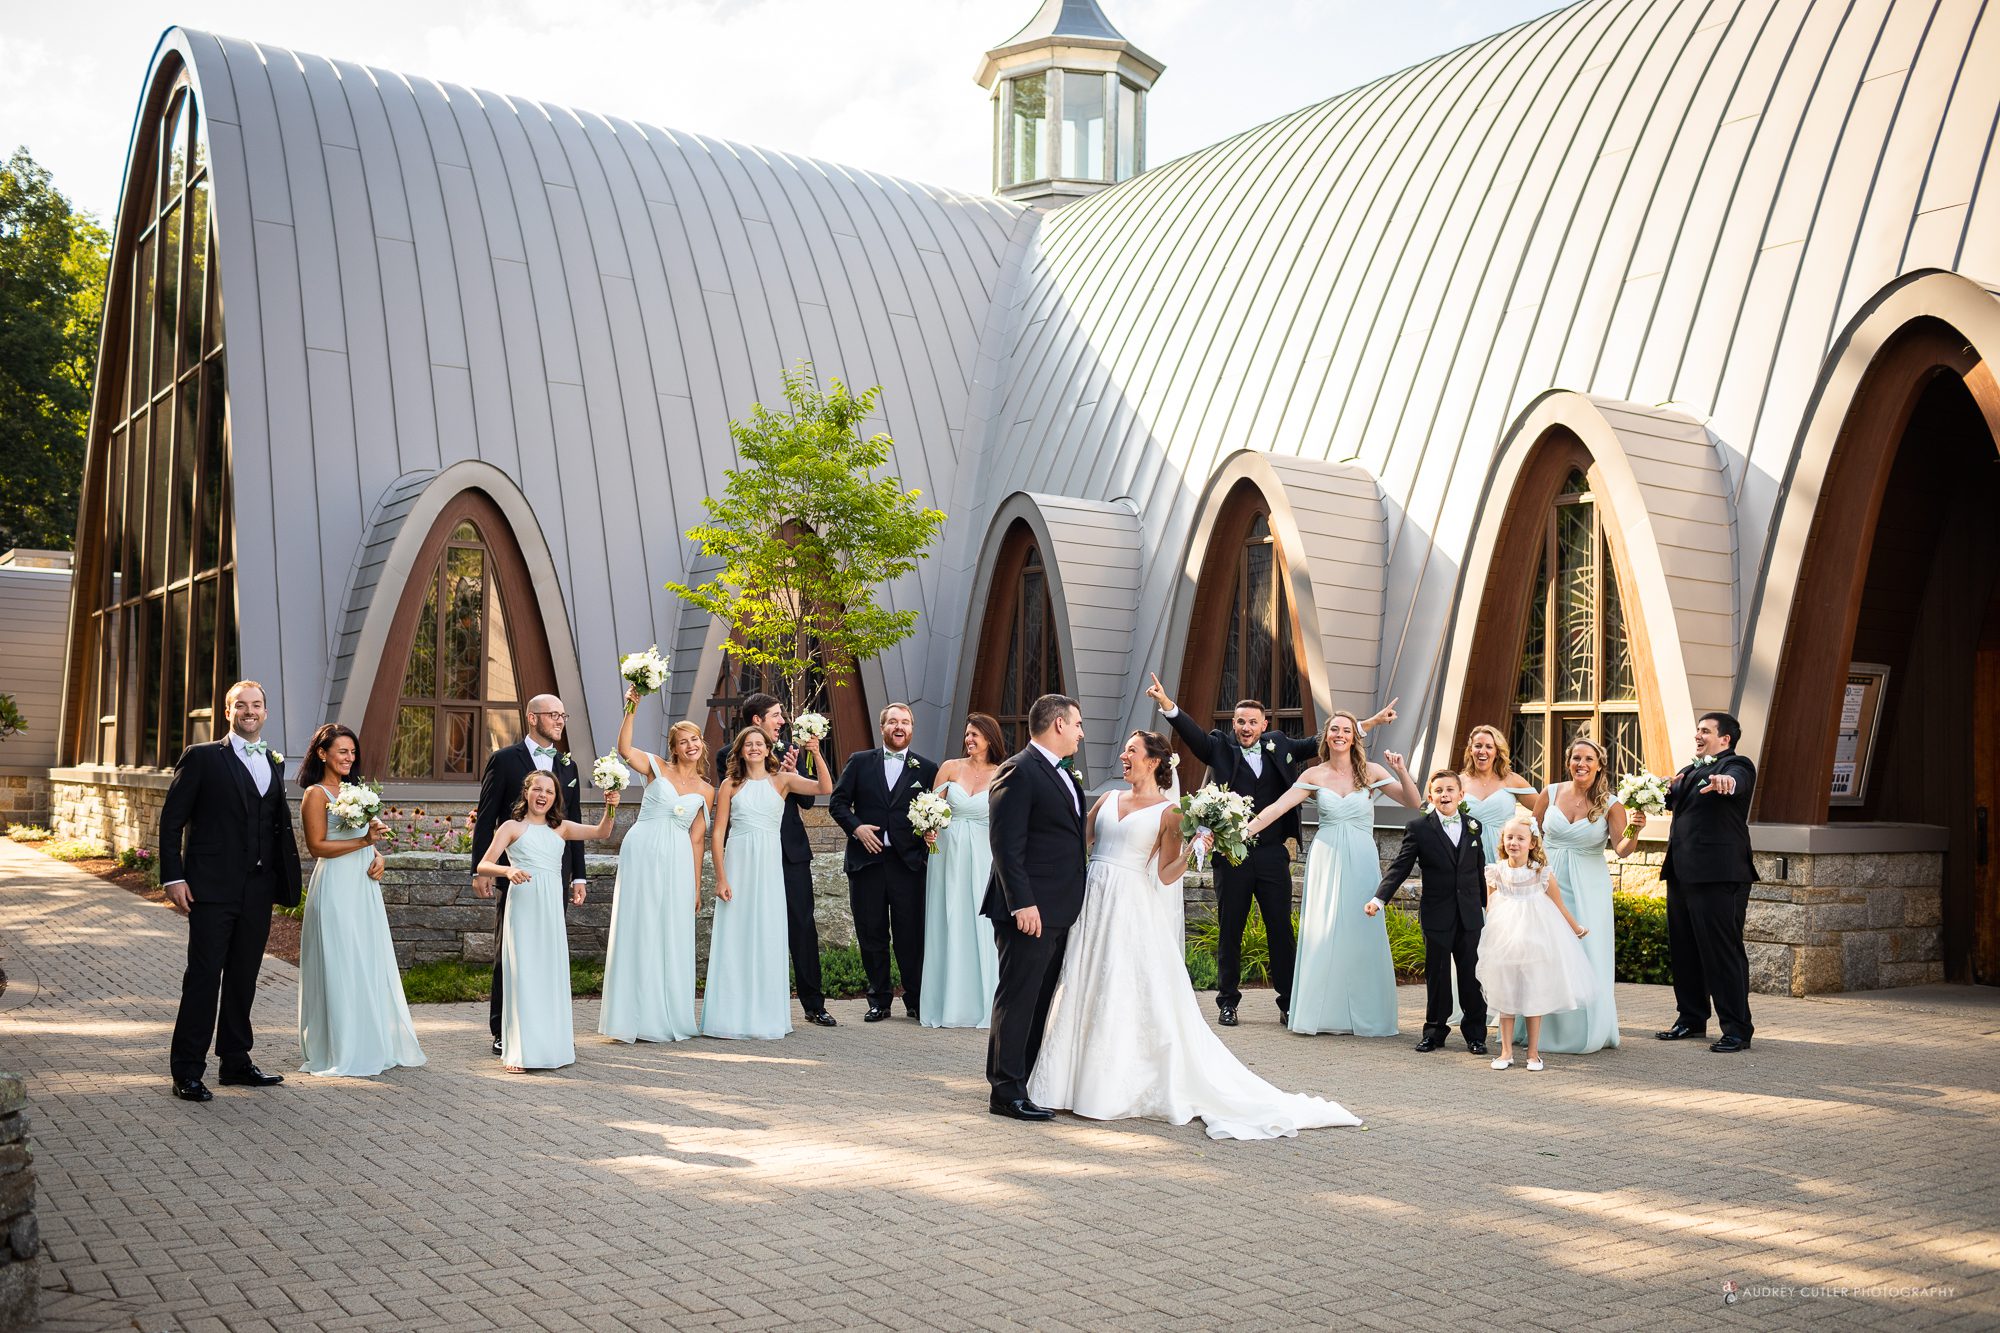 Wedding-party-in-front-of-chapel-of-the-holy-spirit-assumption-college-worcester-ma